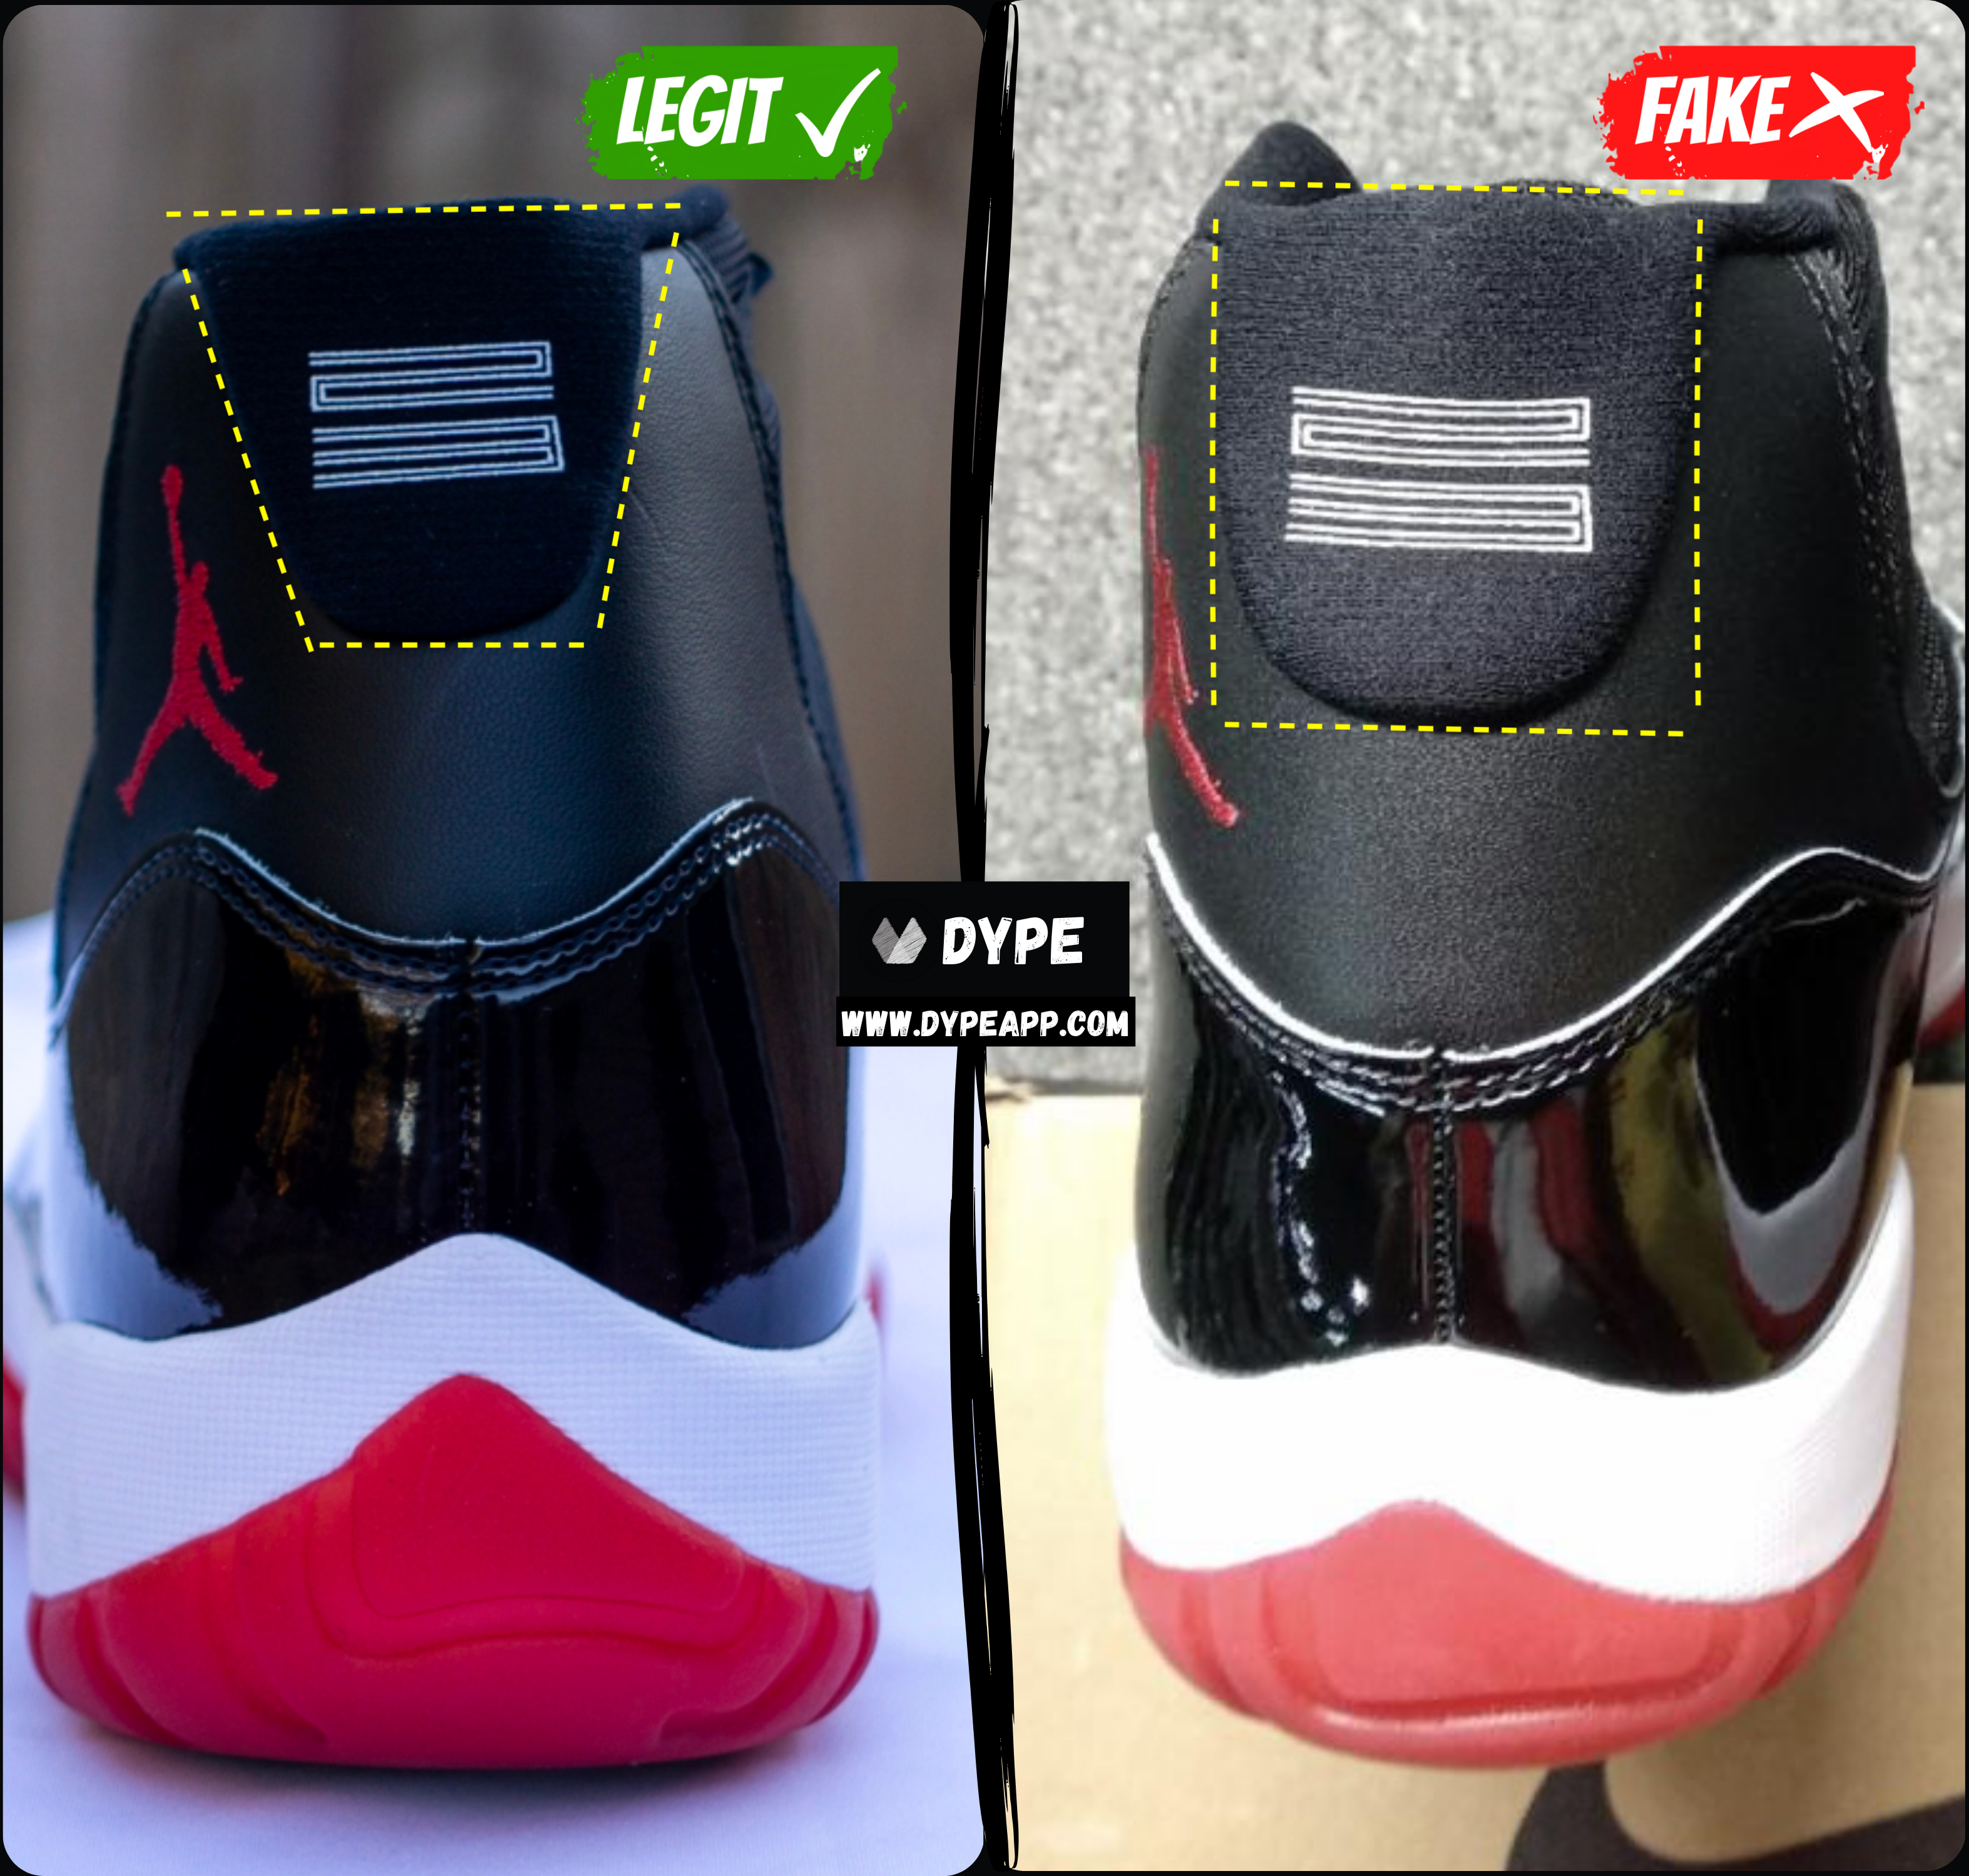 difference between real and fake jordan 11